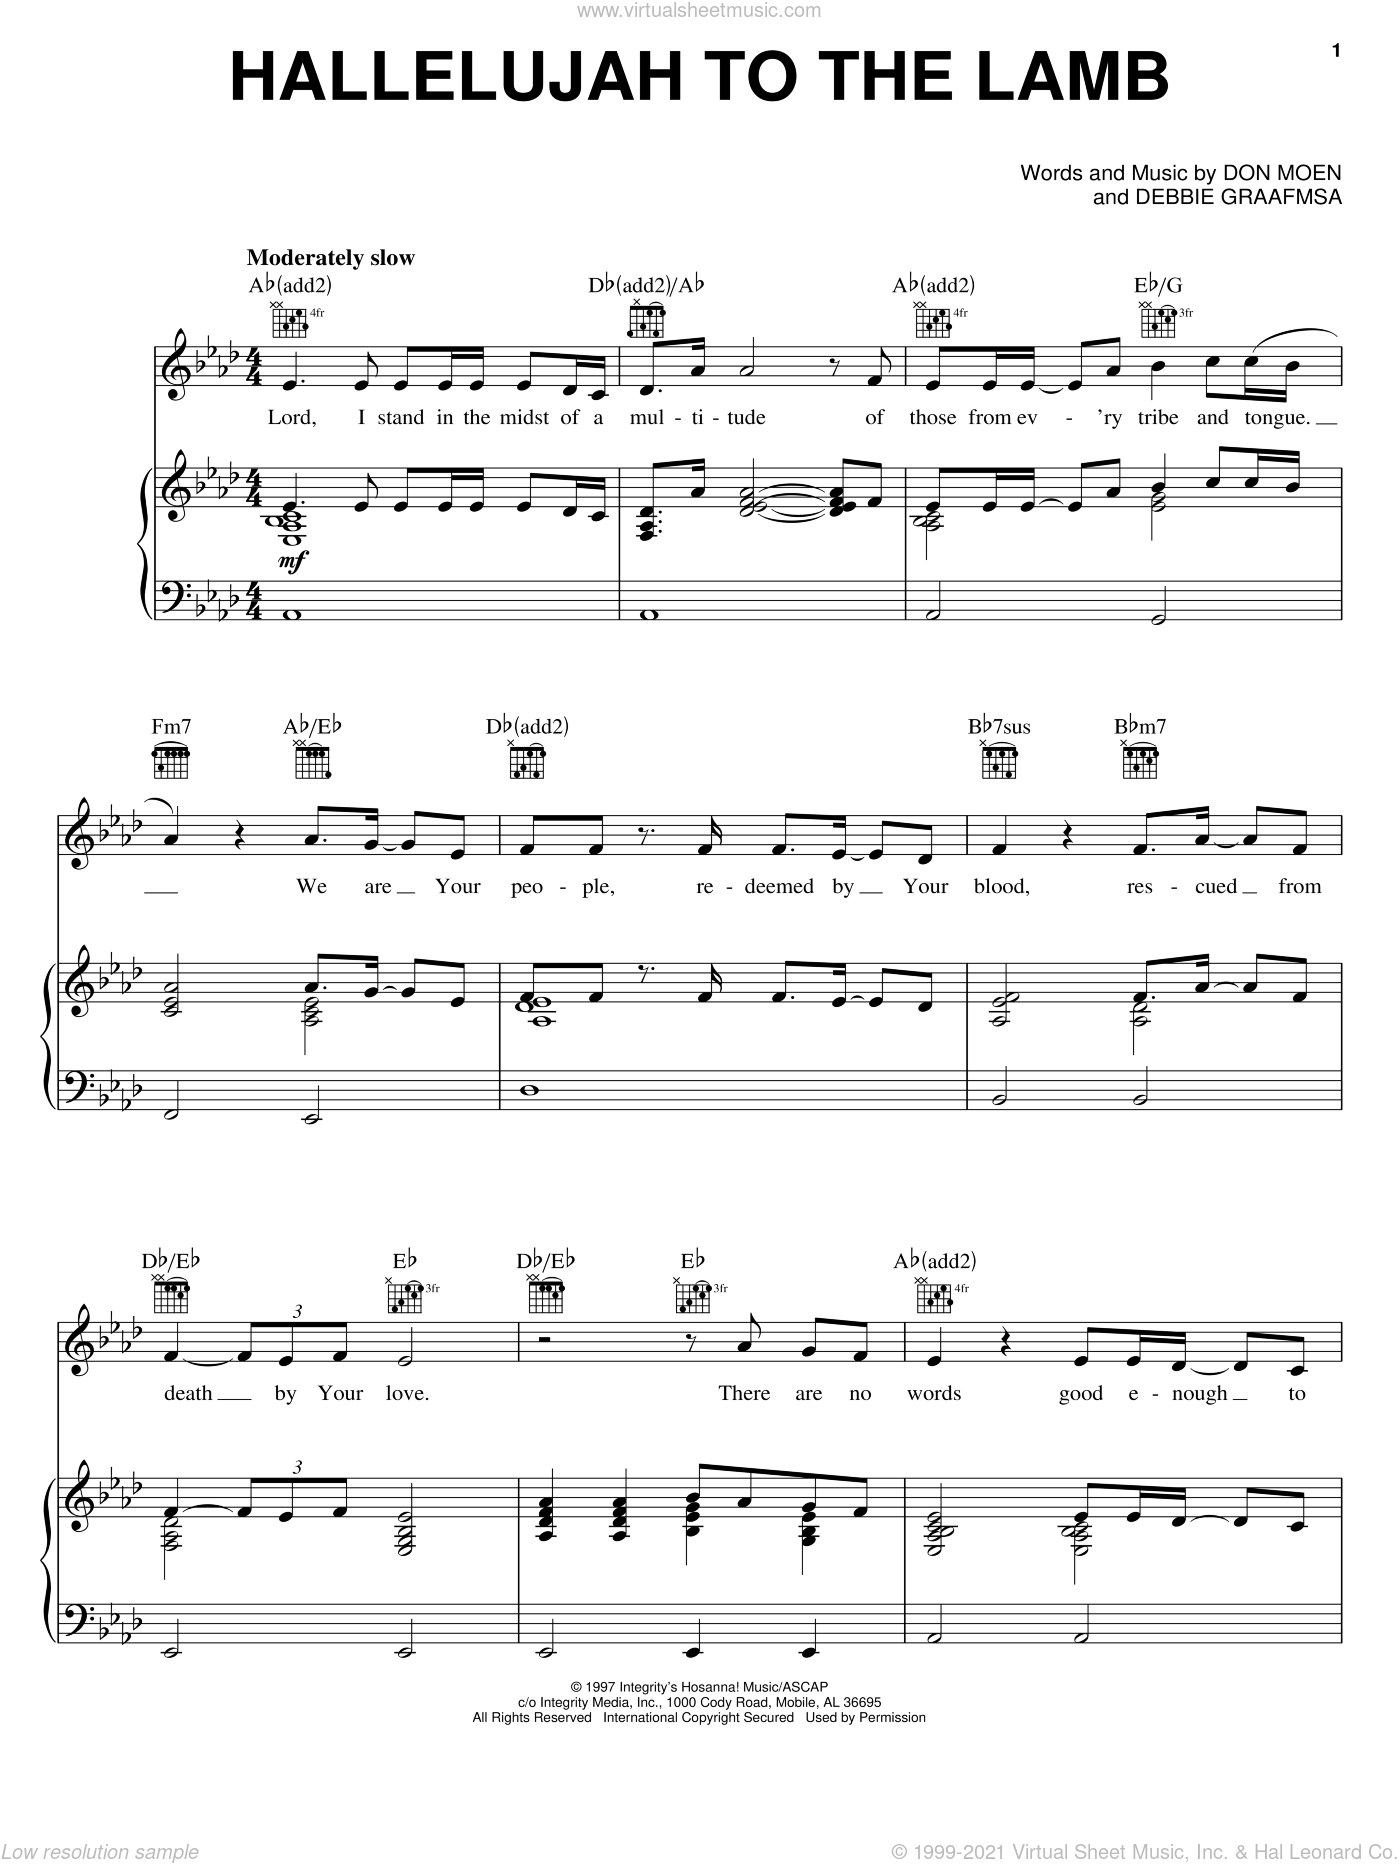 Moen - Hallelujah To The Lamb sheet music for voice, piano or guitar